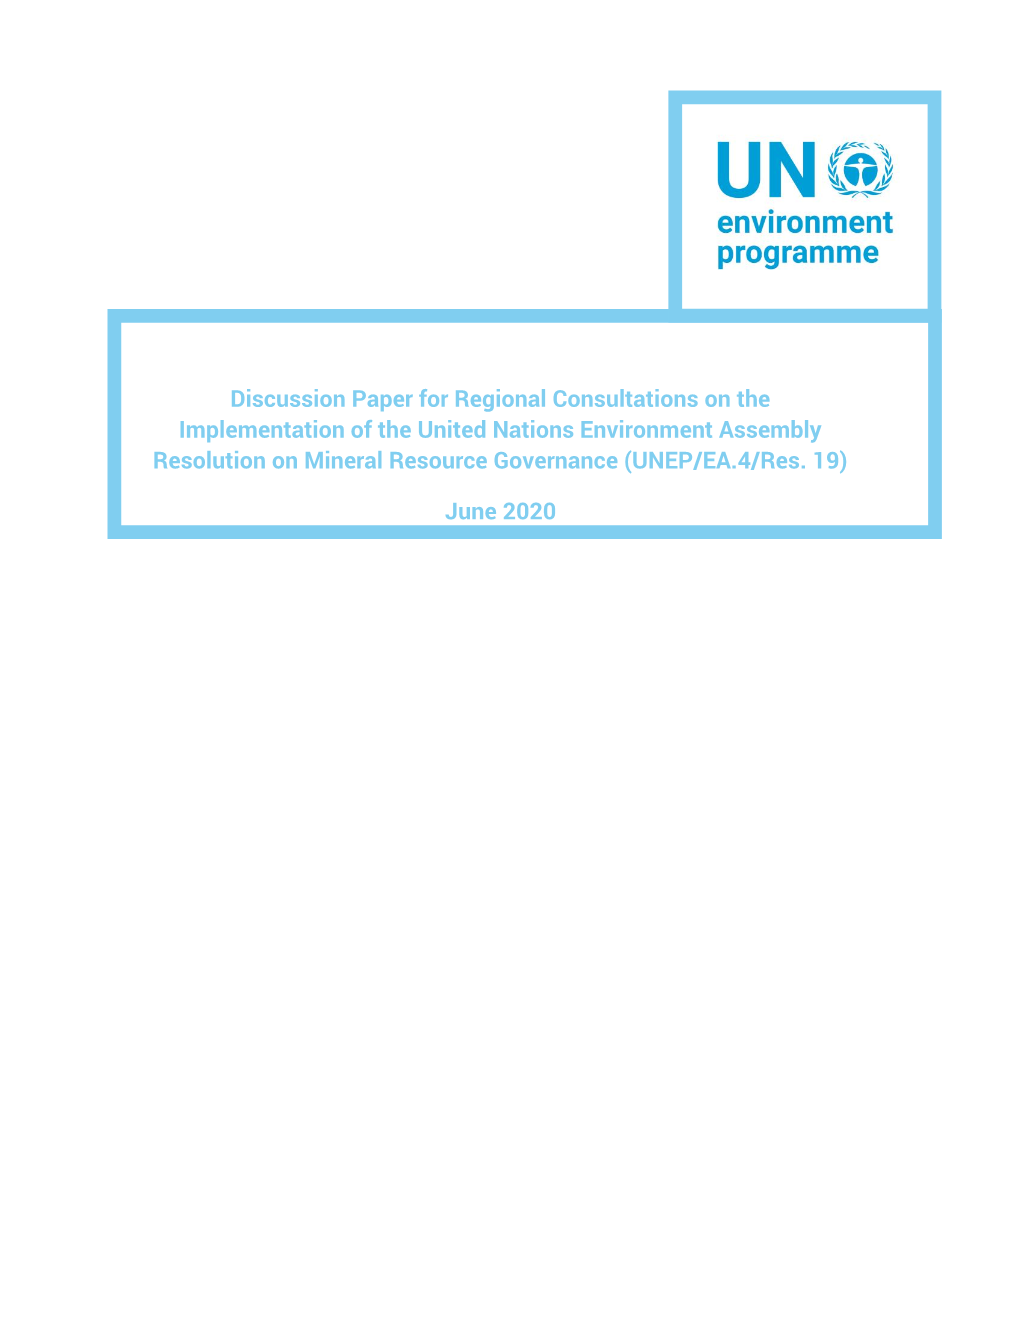 On Mineral Resource Governance (UNEP/EA.4/Res